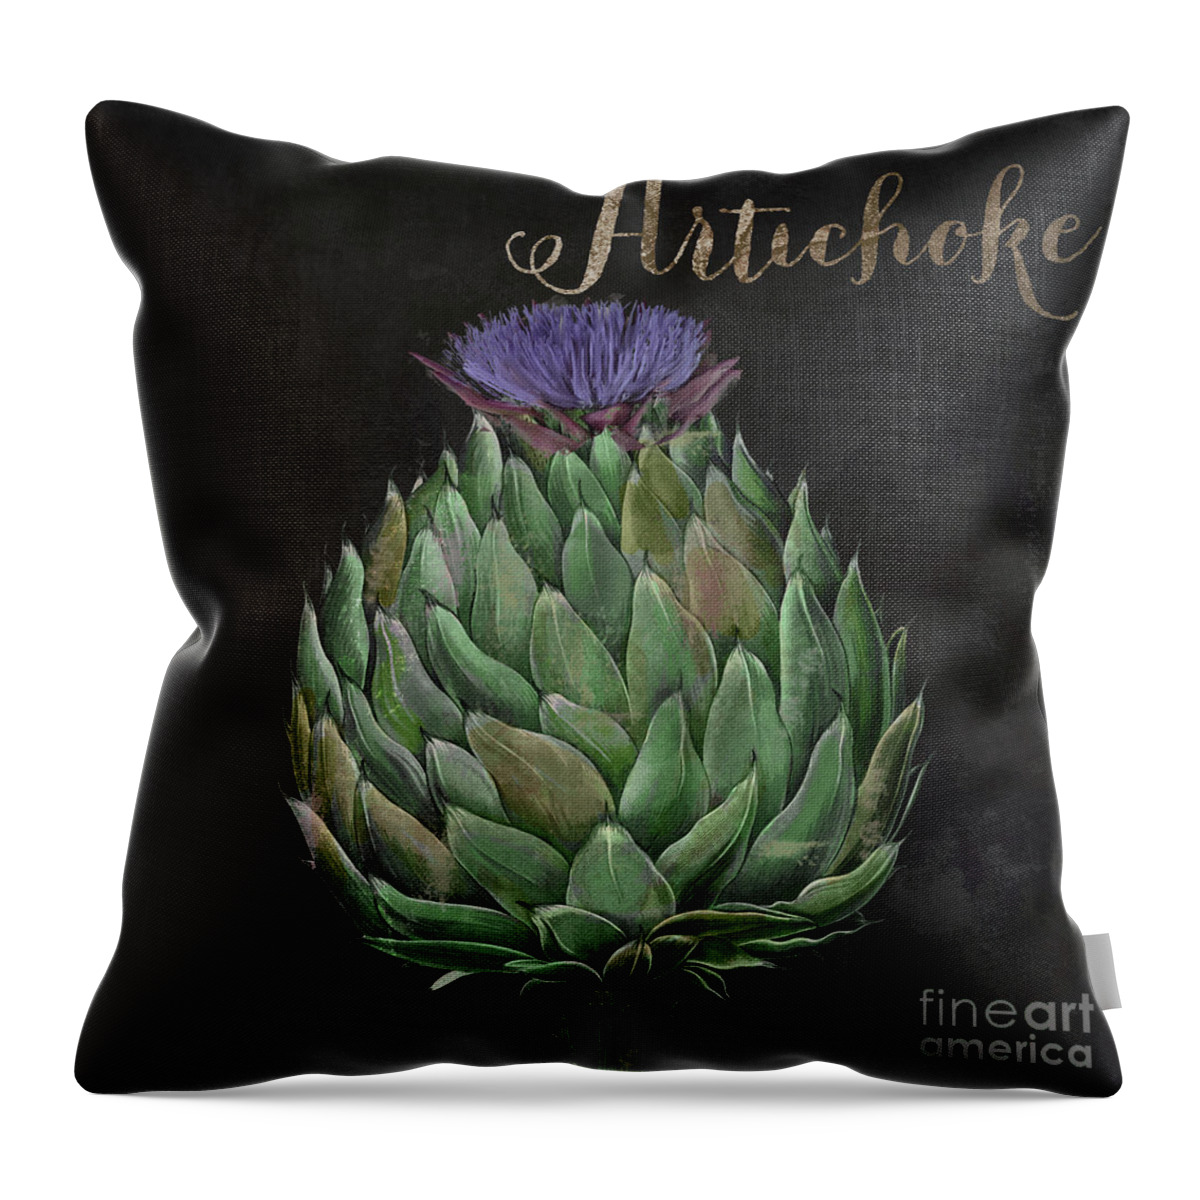 Artichokes Throw Pillow featuring the painting Medley Artichoke by Mindy Sommers